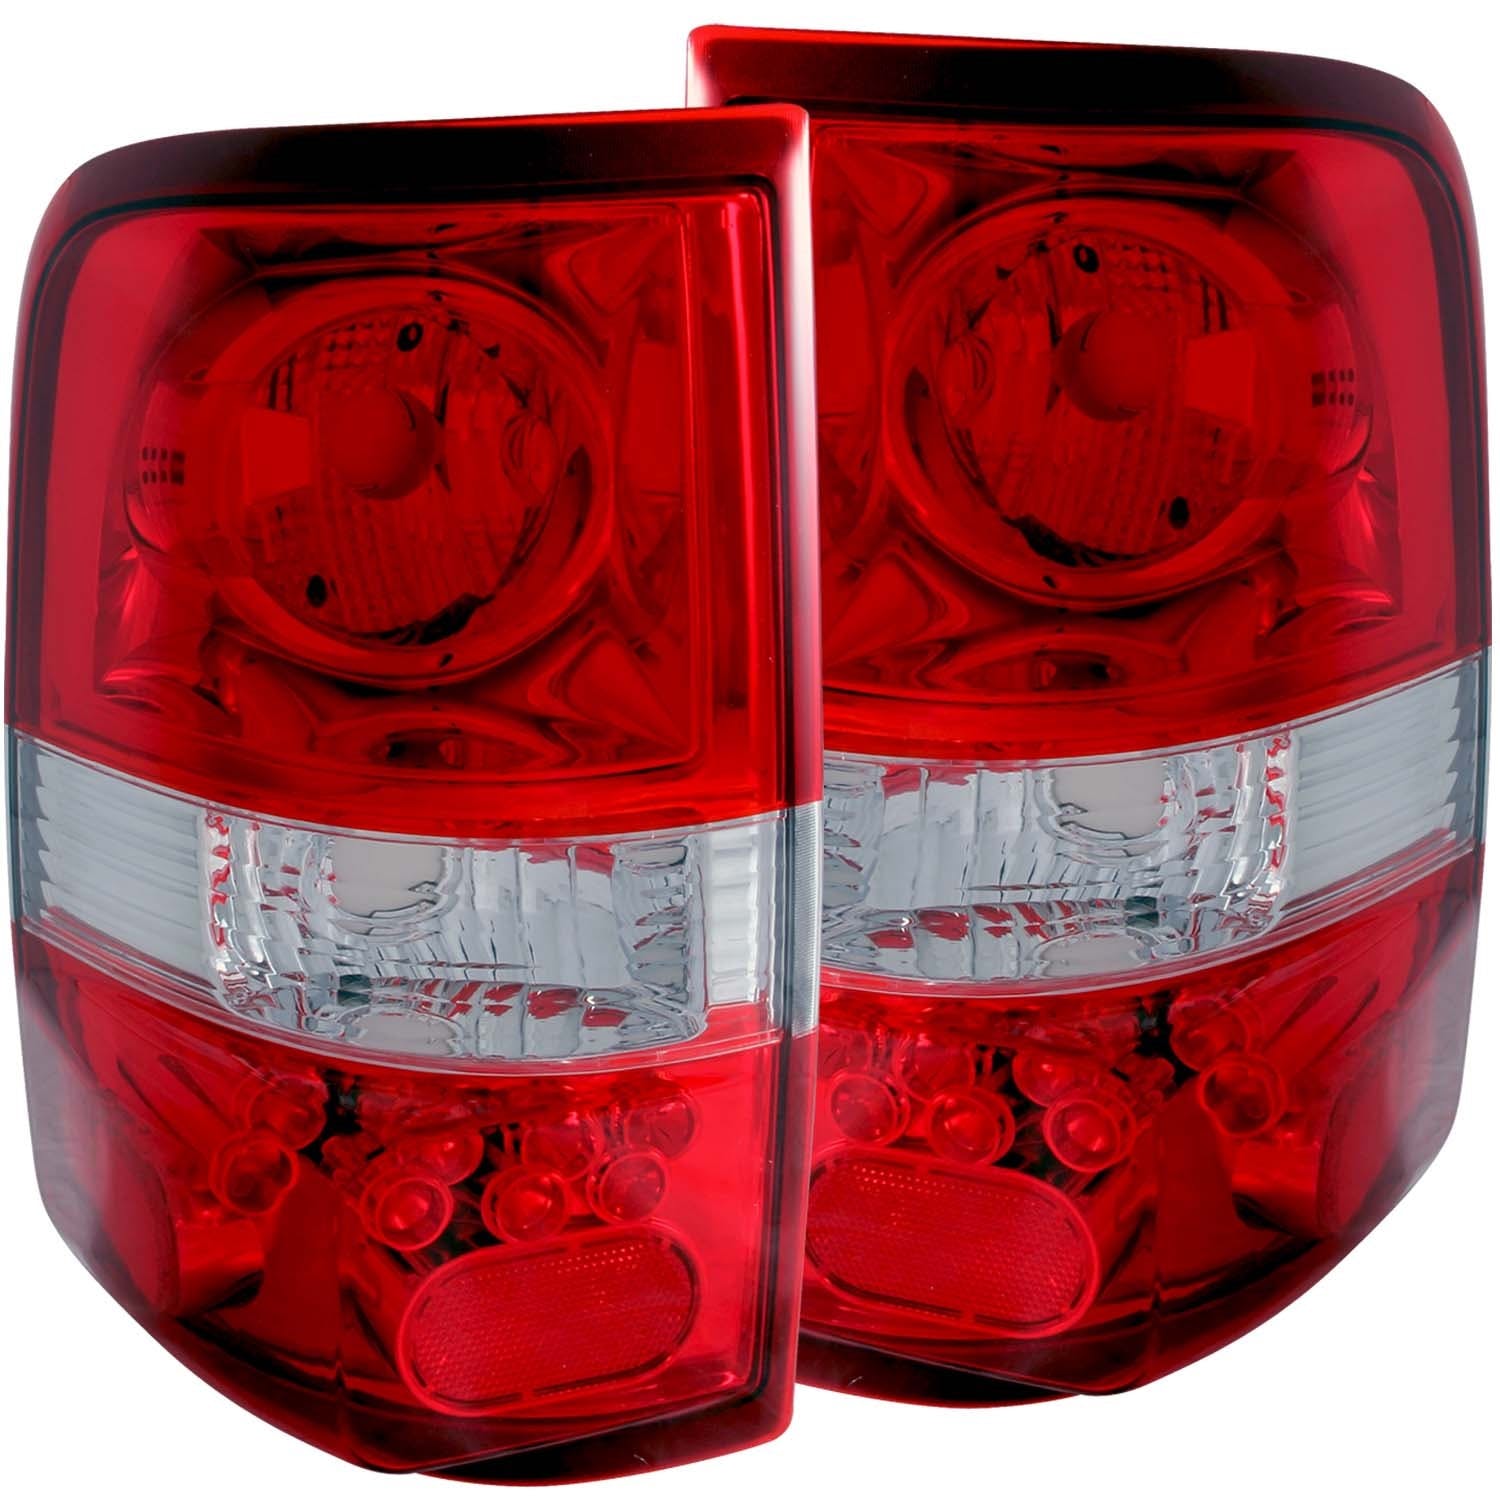 AnzoUSA 211058 Taillights Red/Clear - LED Style